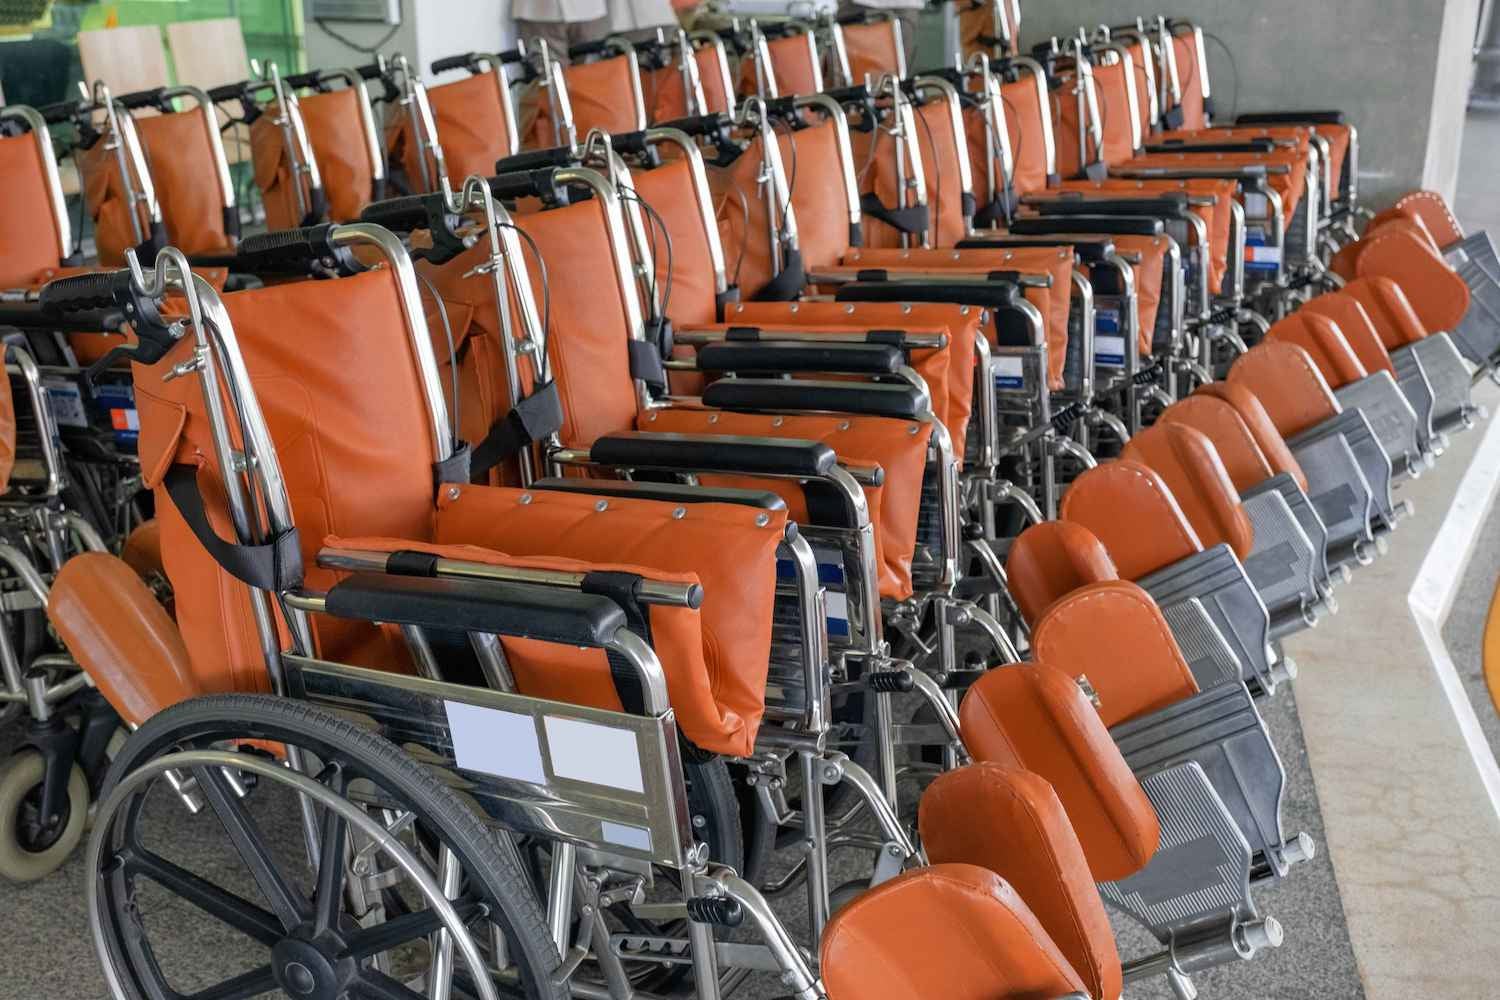 Row of wheelchairs in a medical setting